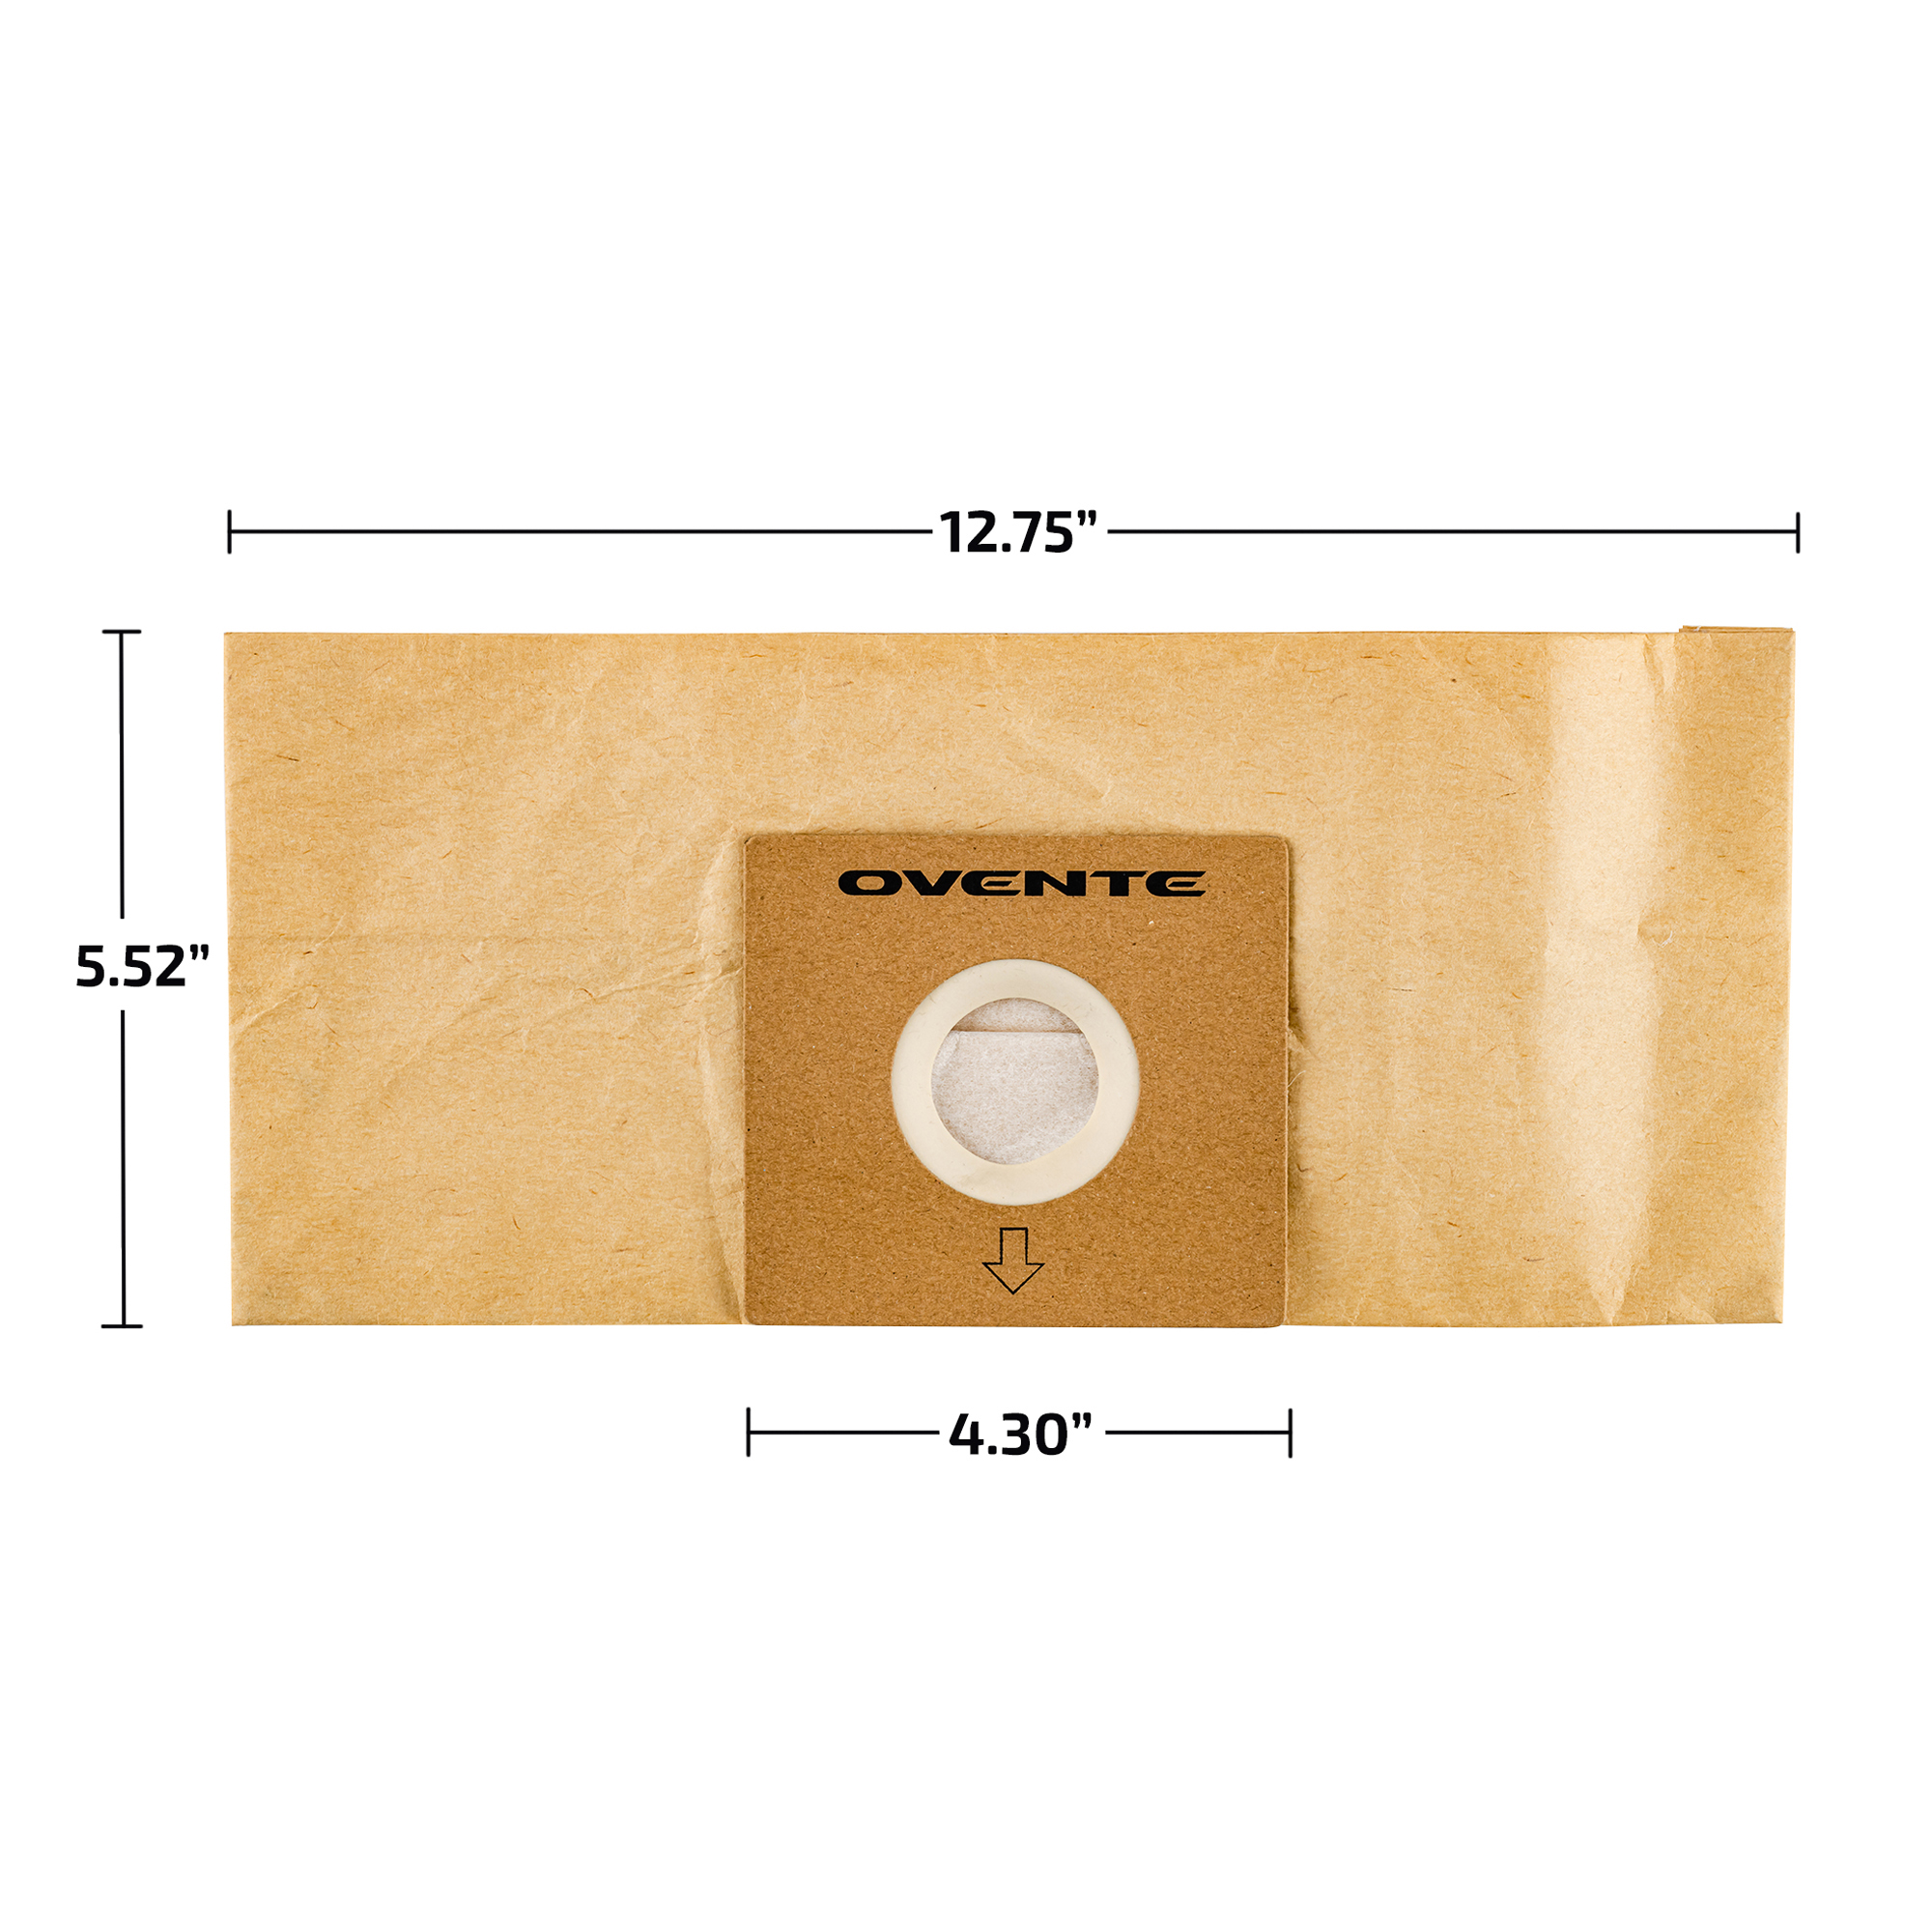 OVENTE 8-Pack Premium Disposable Compact Dust Bag Replacement with Ultra Filtration, Fit for ST1600 Canister Vacuum Cleaner Model Series Large Size and Easy Storage, Brown ACPST16708 - image 4 of 7